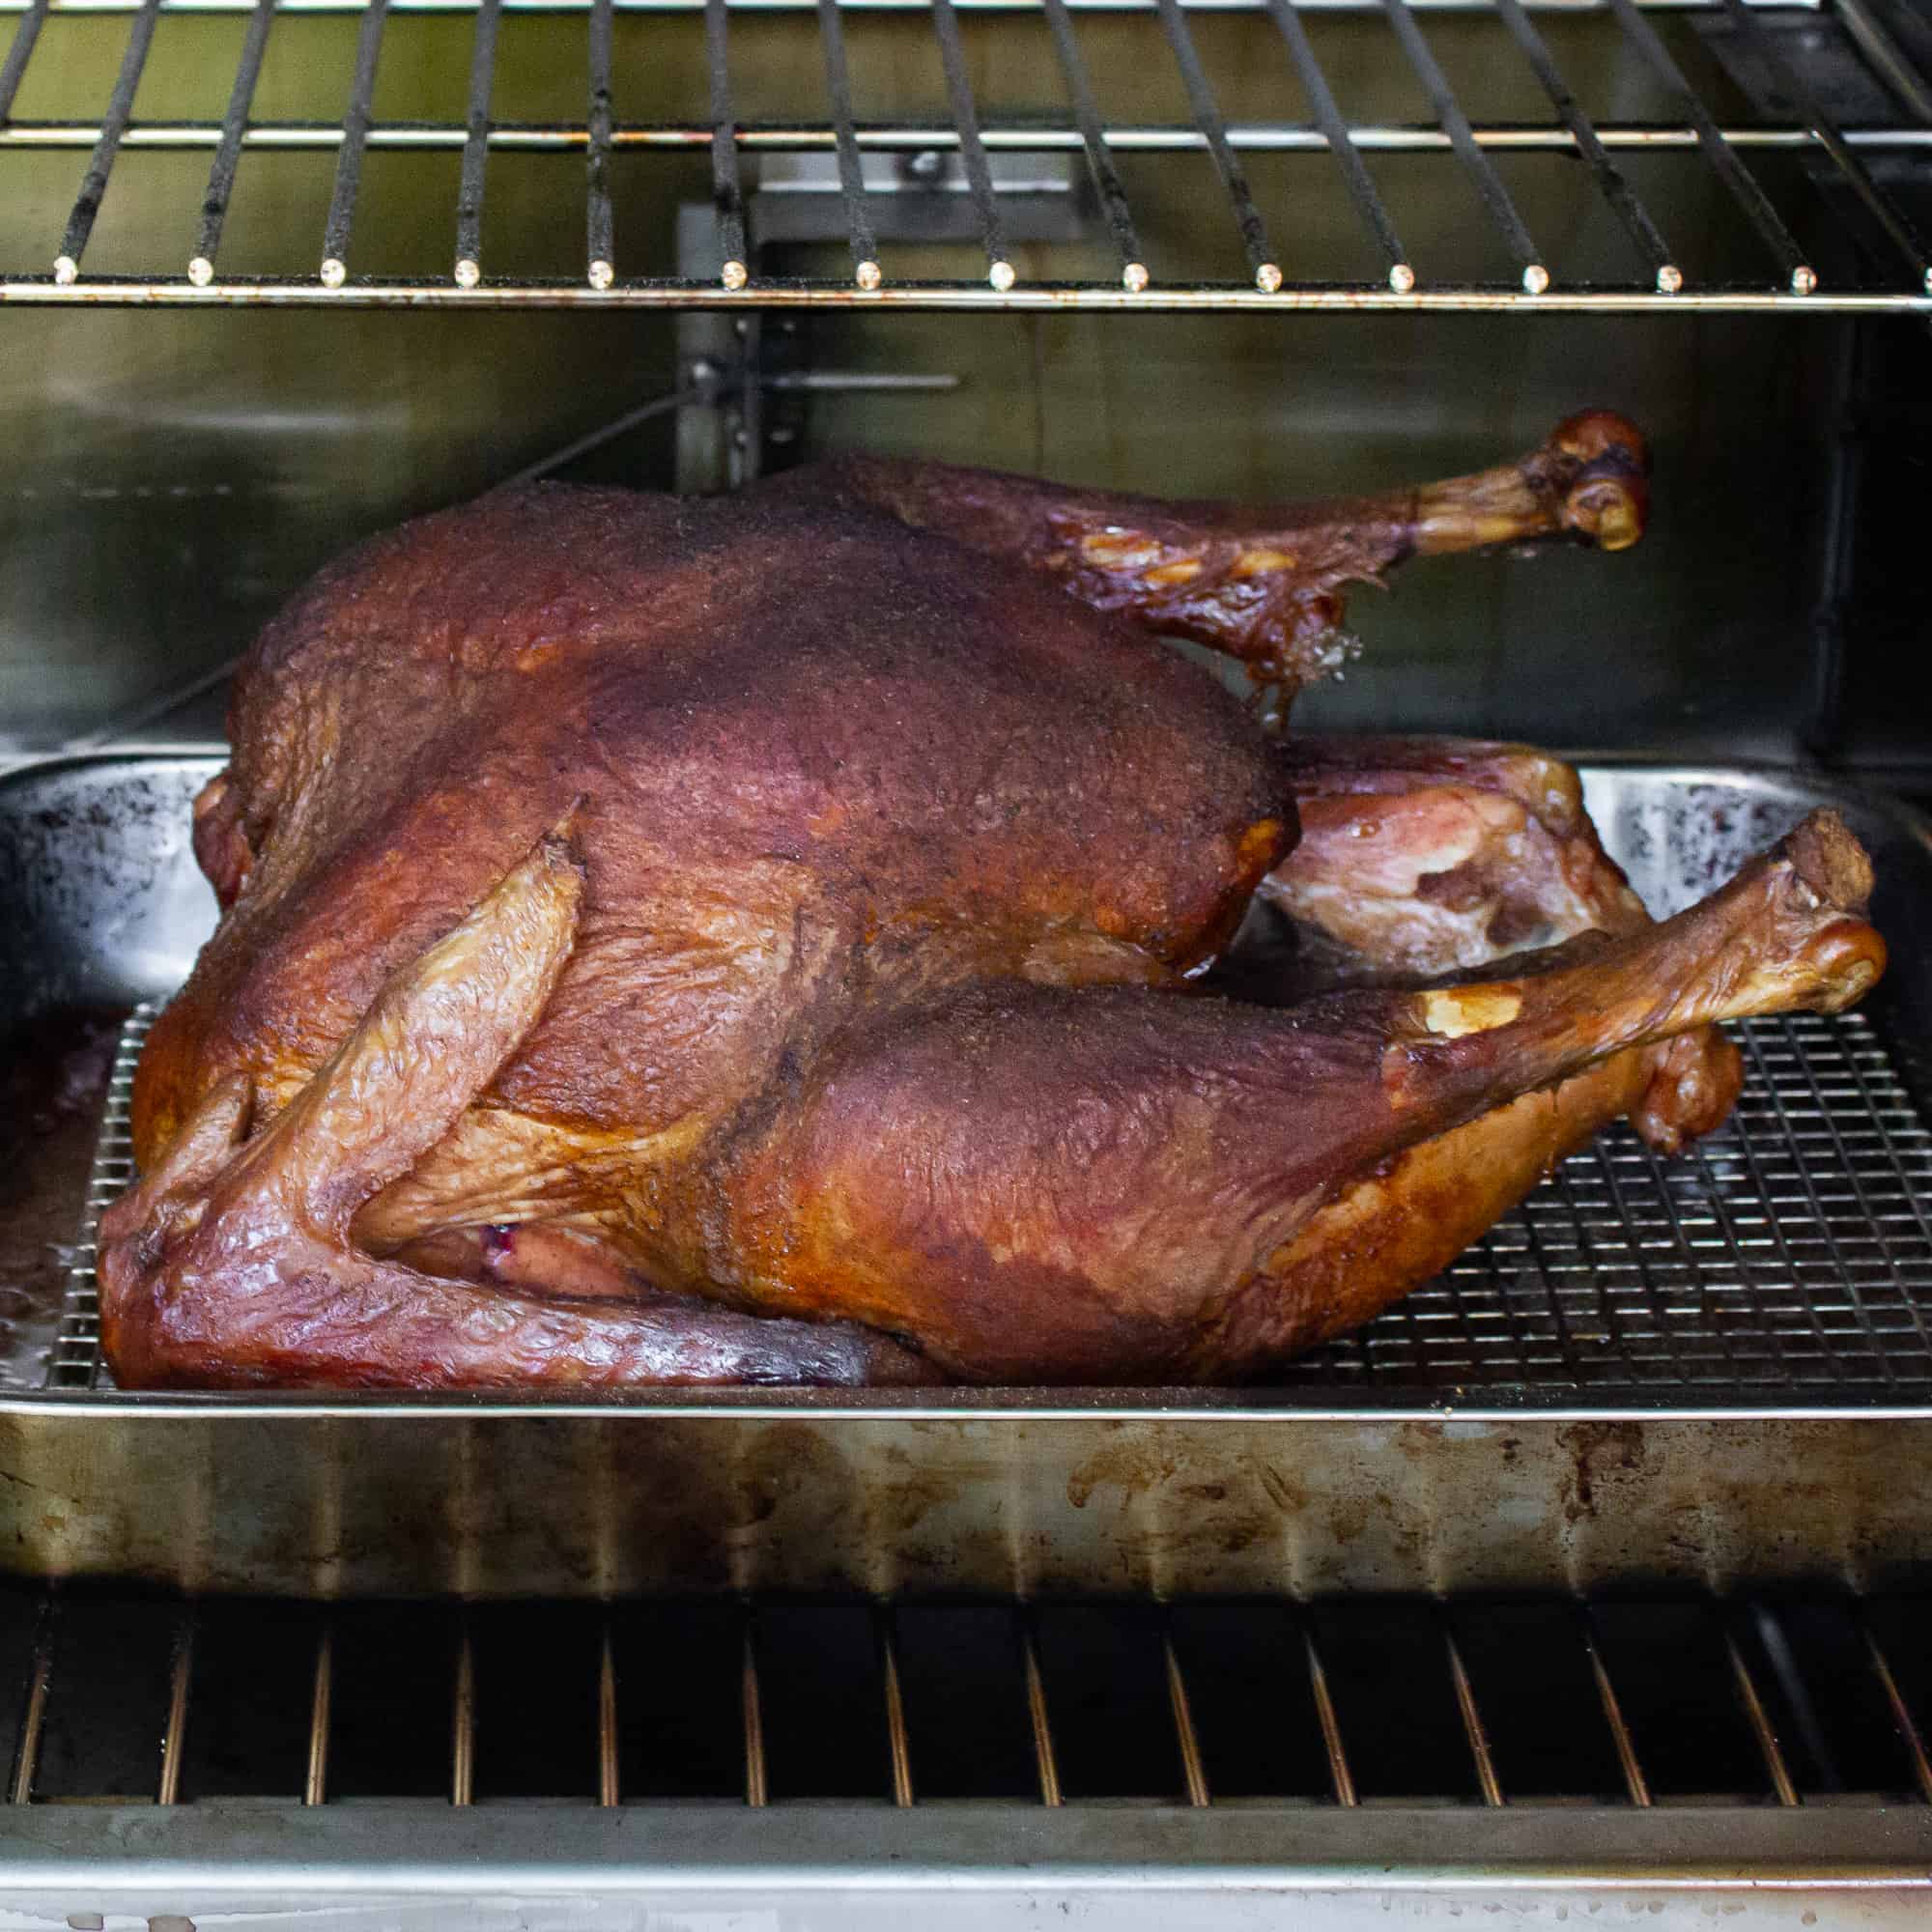 Time and Temperature to Cook a Turkey on the Grill